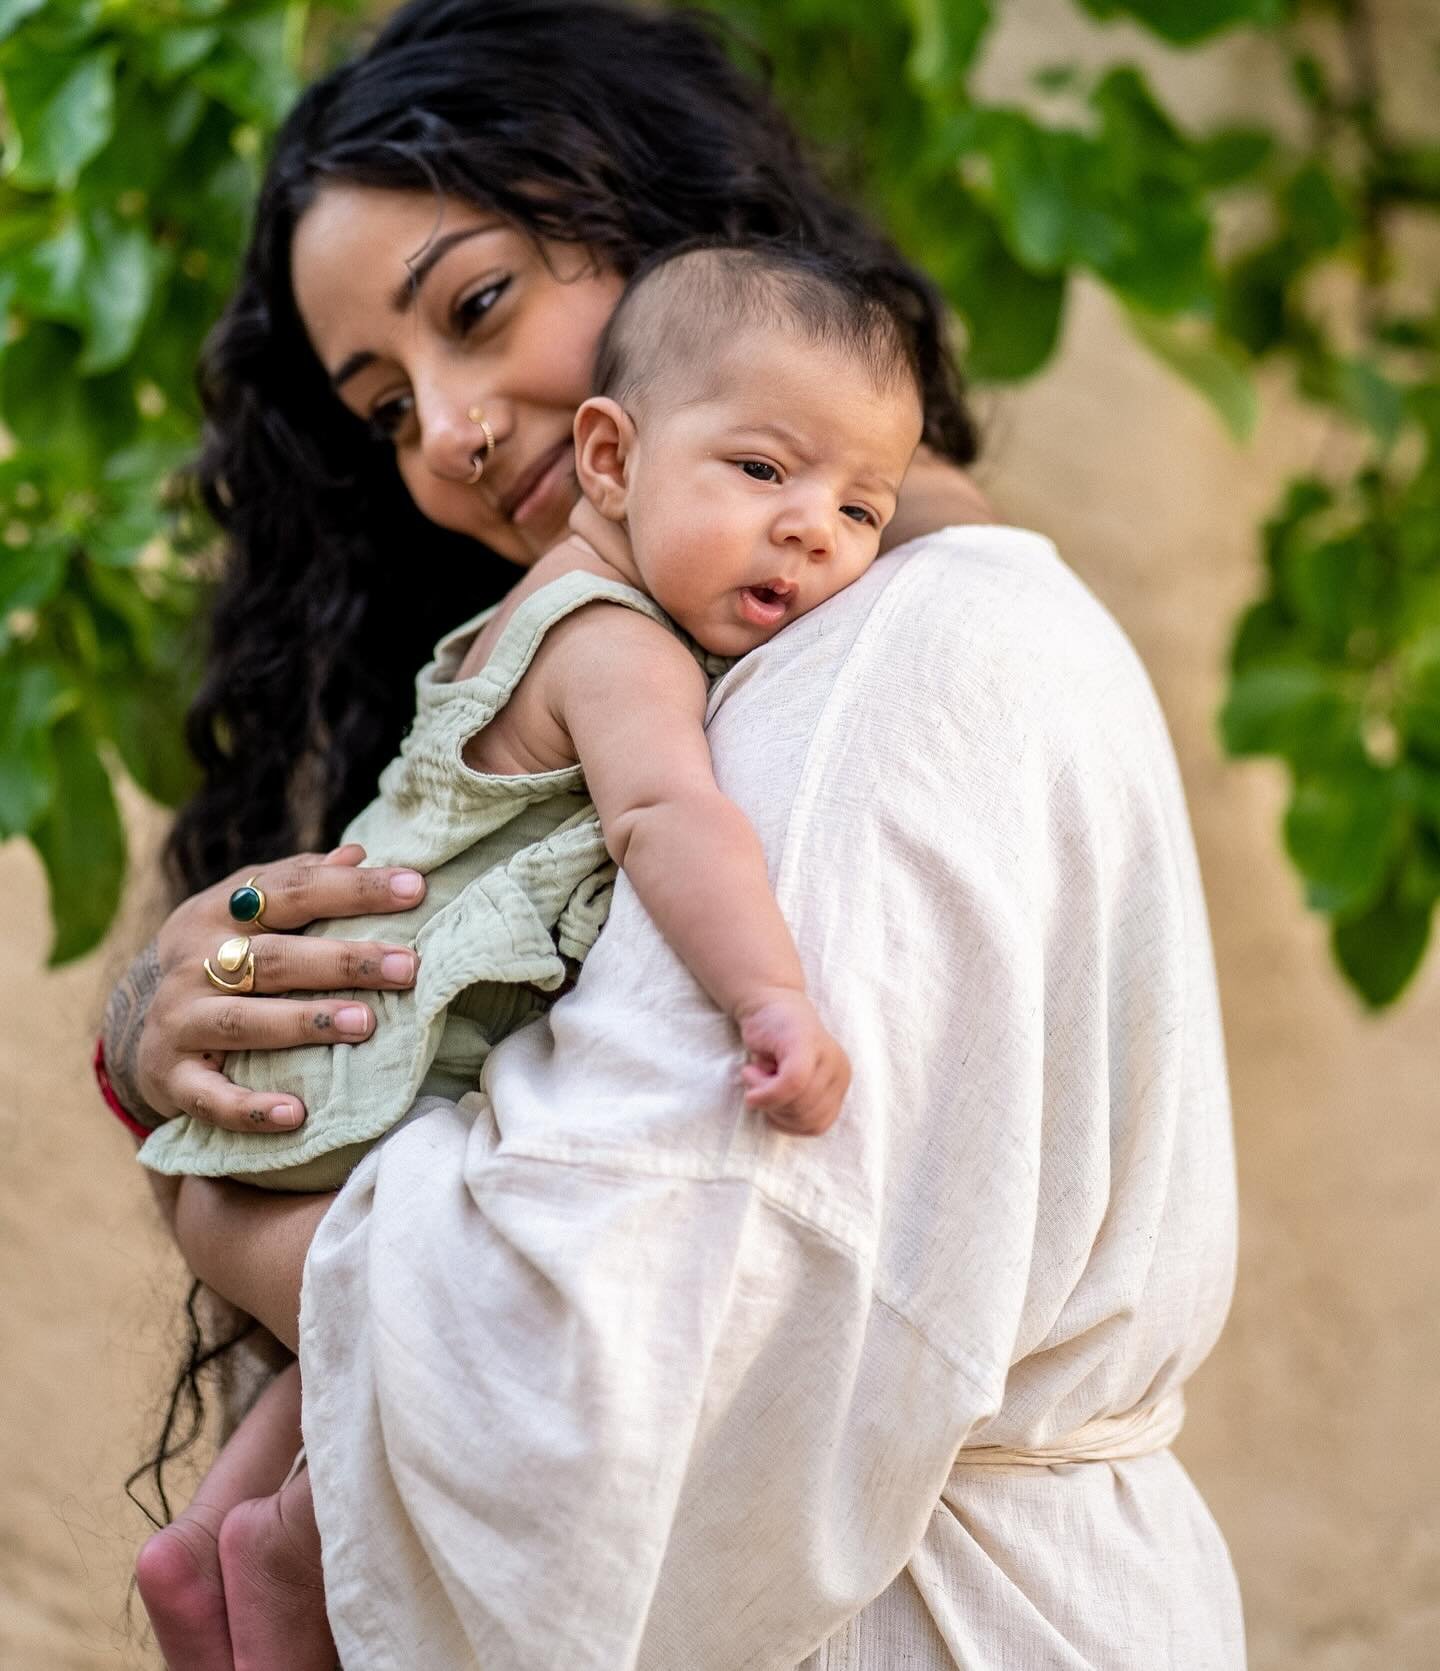 🌸 mother&rsquo;s day give away 🌸 

each day, i feel so blessed to visit with, nourish, nurture, and care for mothers through the wisdom of ayurveda, and i see just how beautiful and profound this tradition of maternal healing truly is&mdash; my dee